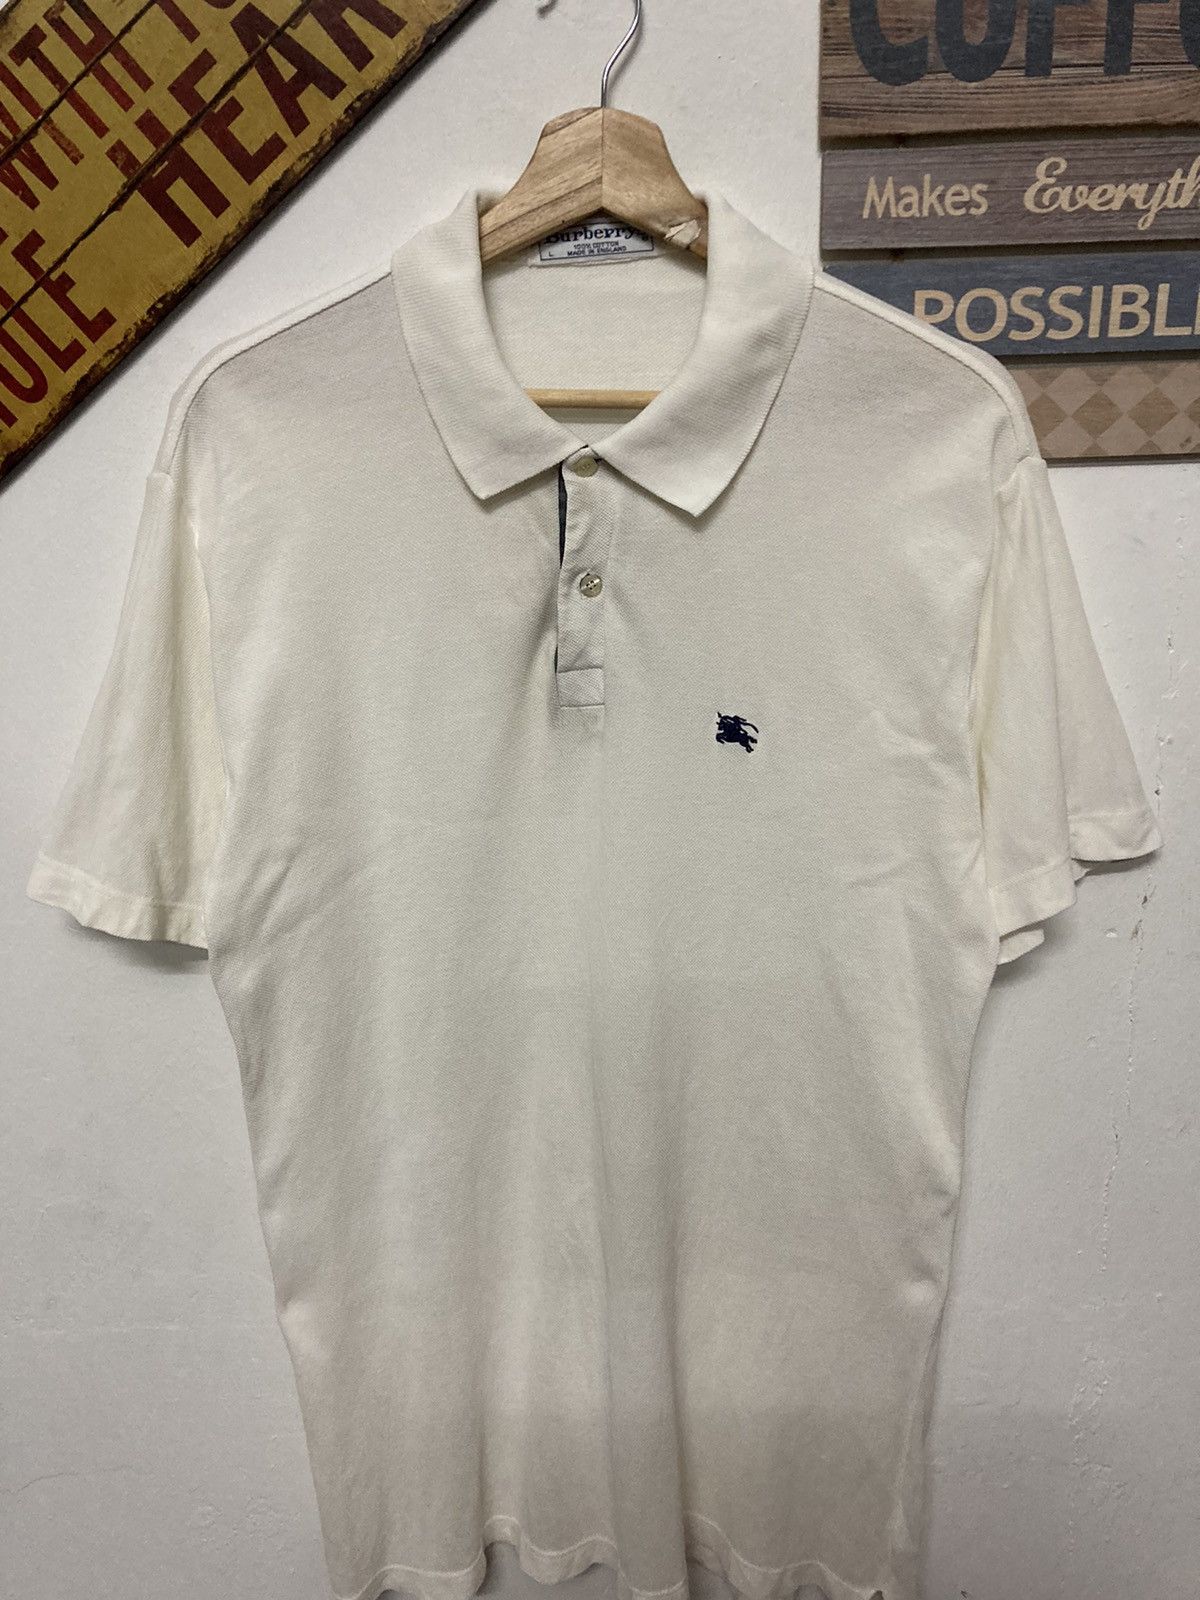 Vintage Burberrys Polo Shirt Made in England - 3